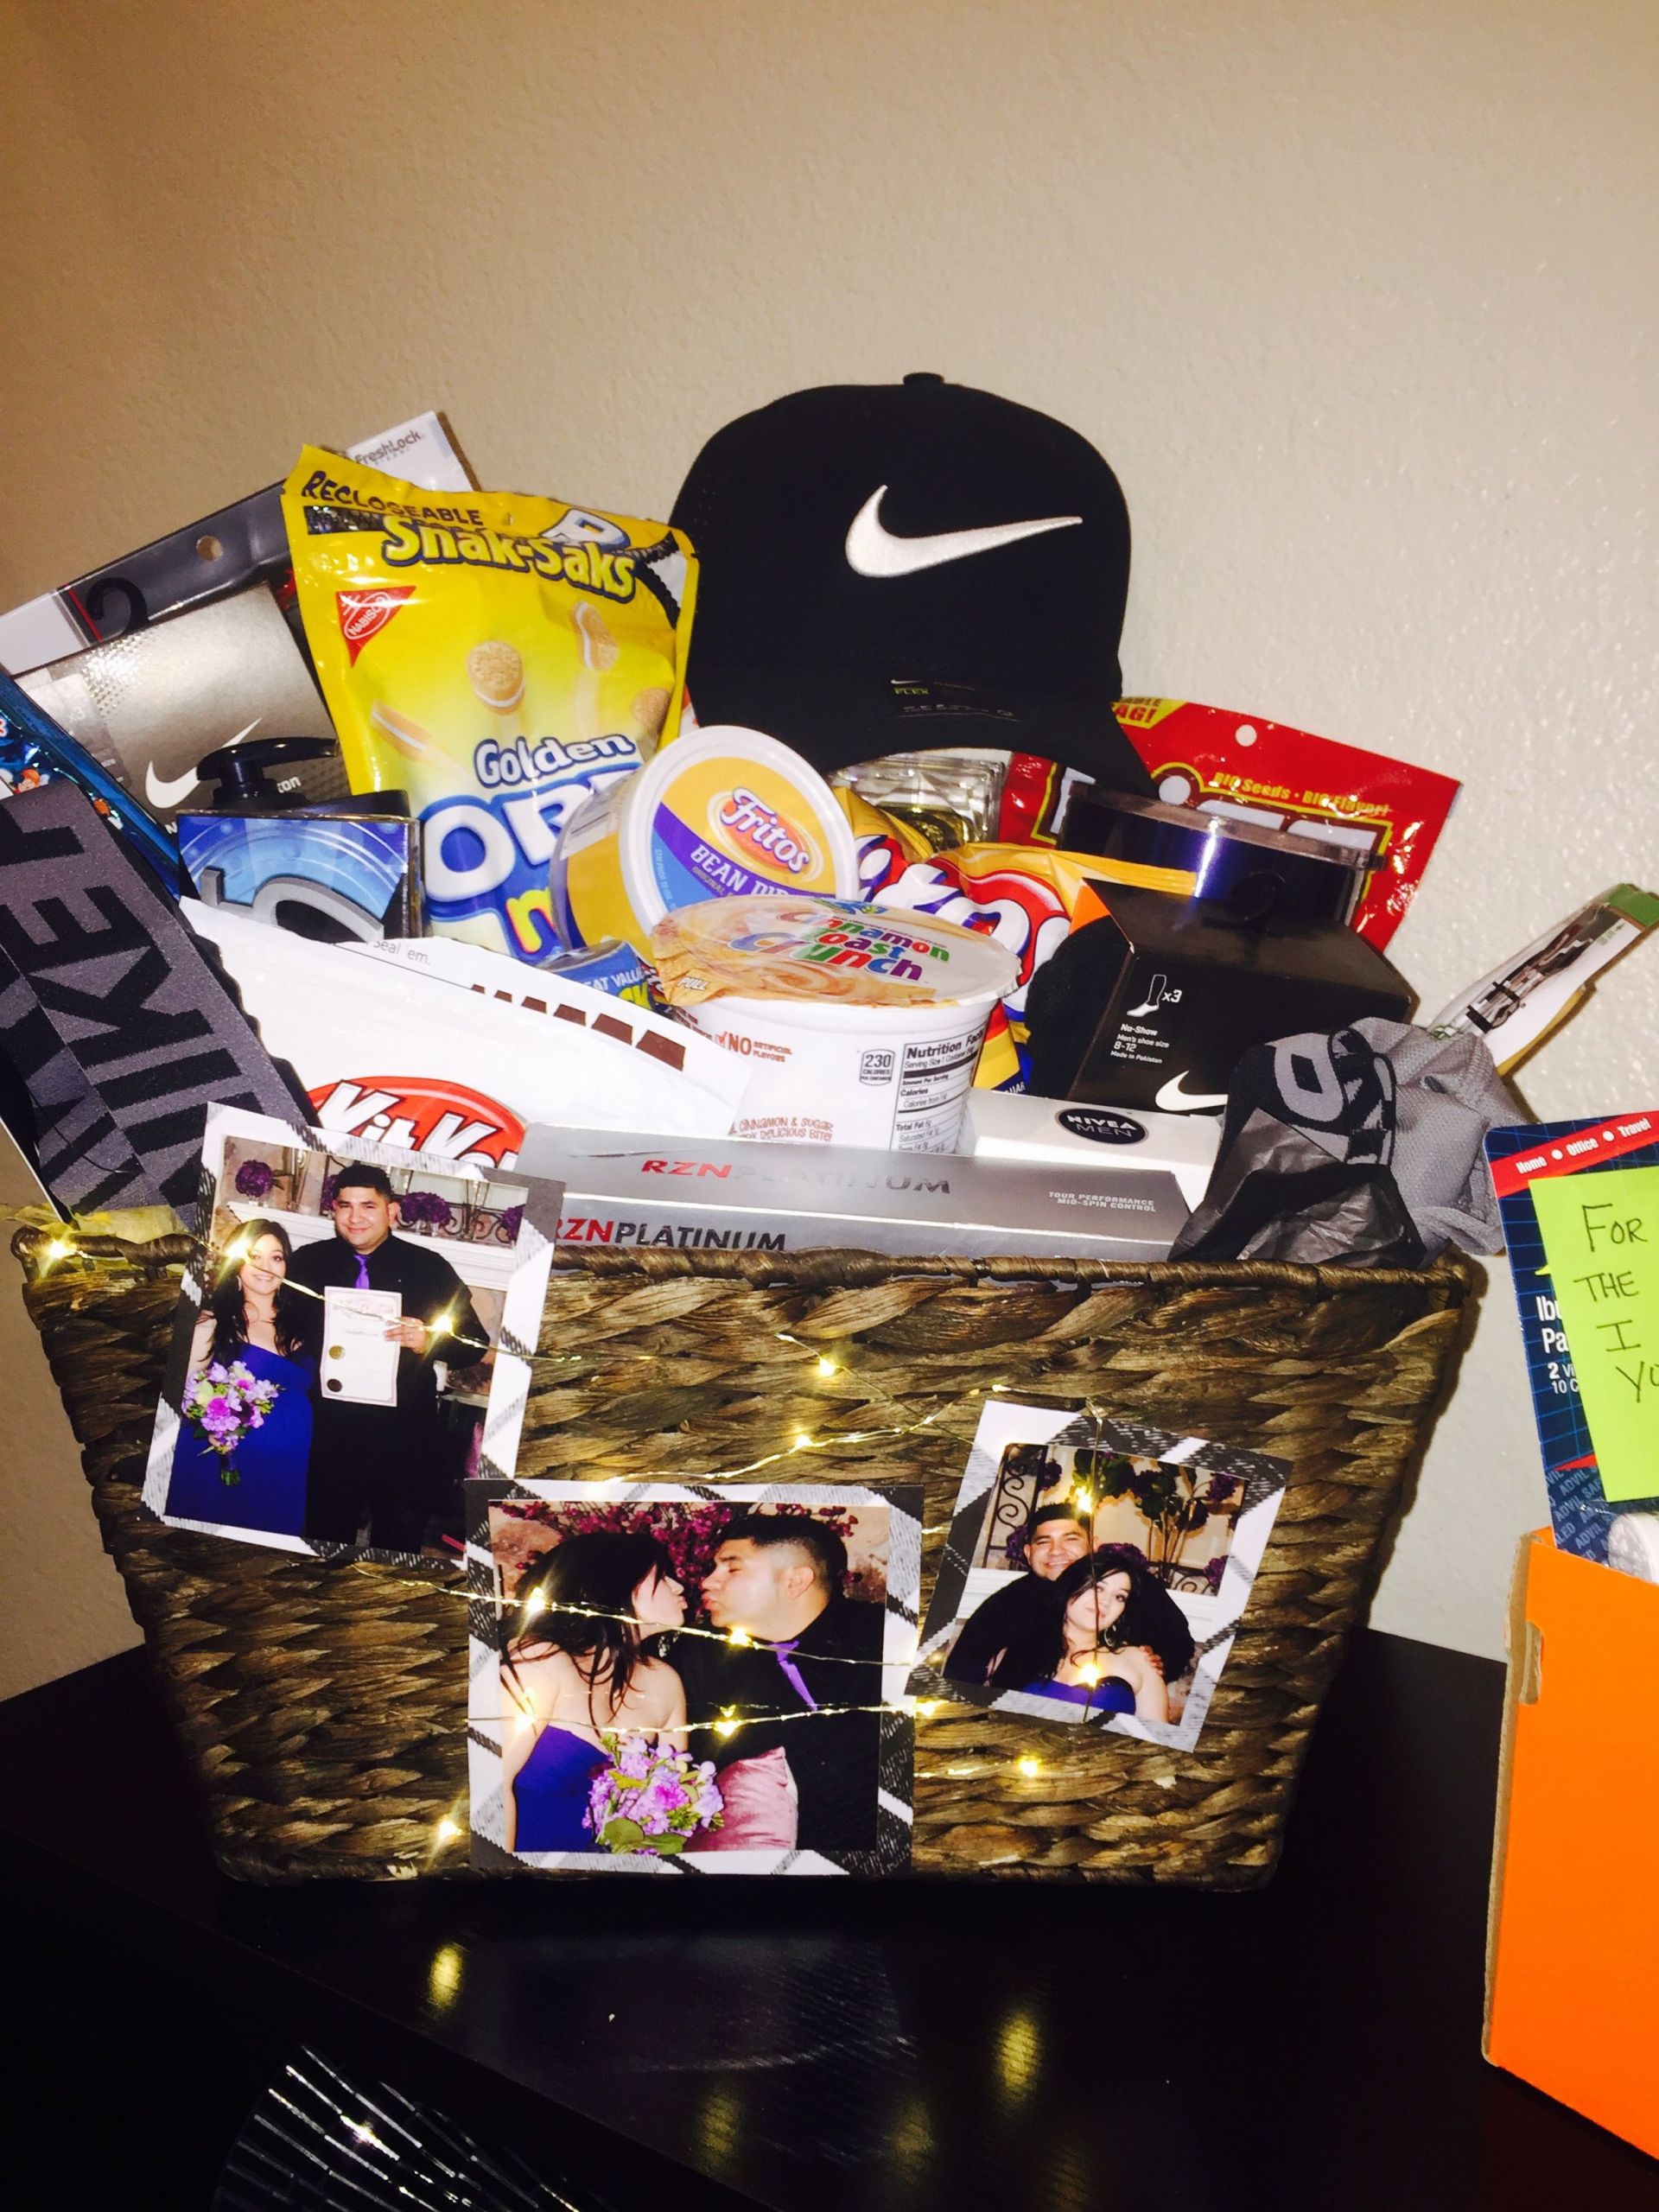 Cute Gift Basket Ideas For Boyfriend
 Anniversary t basket I put to her for my husband full